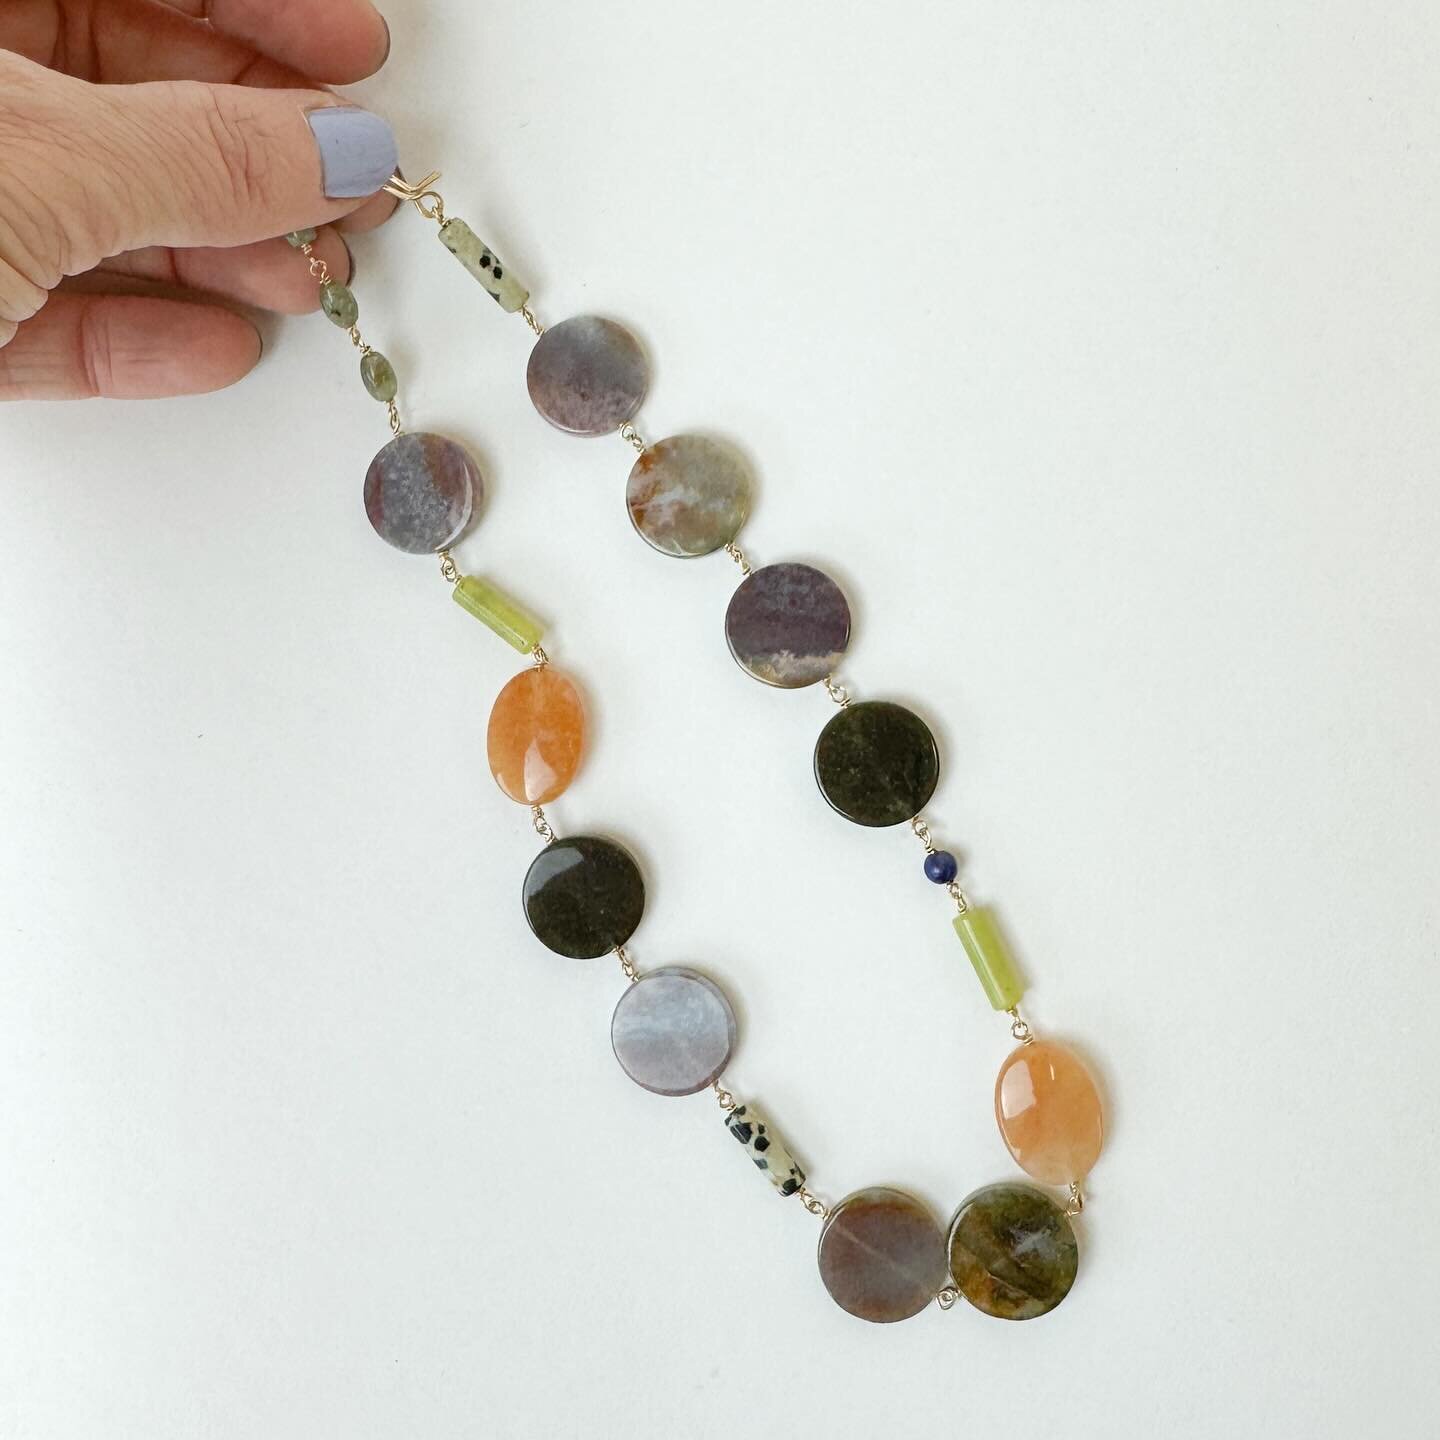 A play on color and shape. The Marquis is a beautiful mix of jasper, aventurine, quartz and lapis.